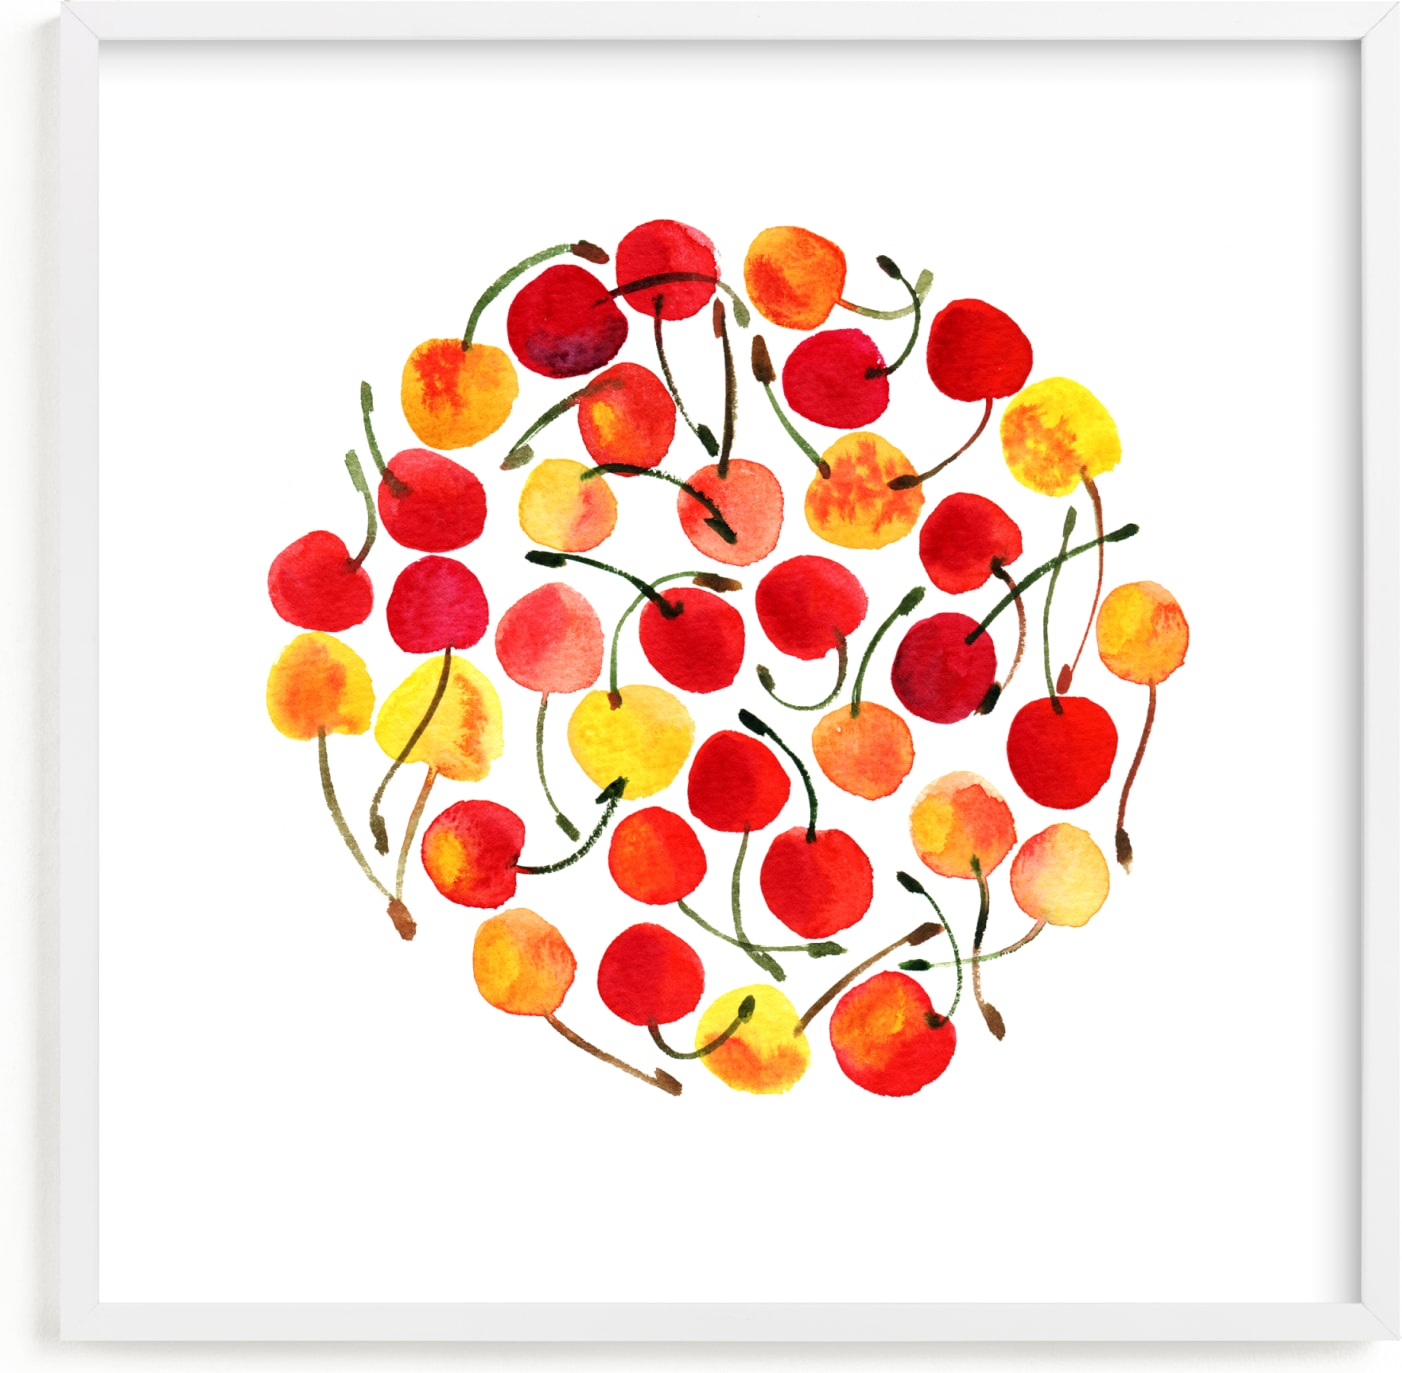 This is a colorful kids wall art by Alexandra Dzh called whimsical watercolor cherries.